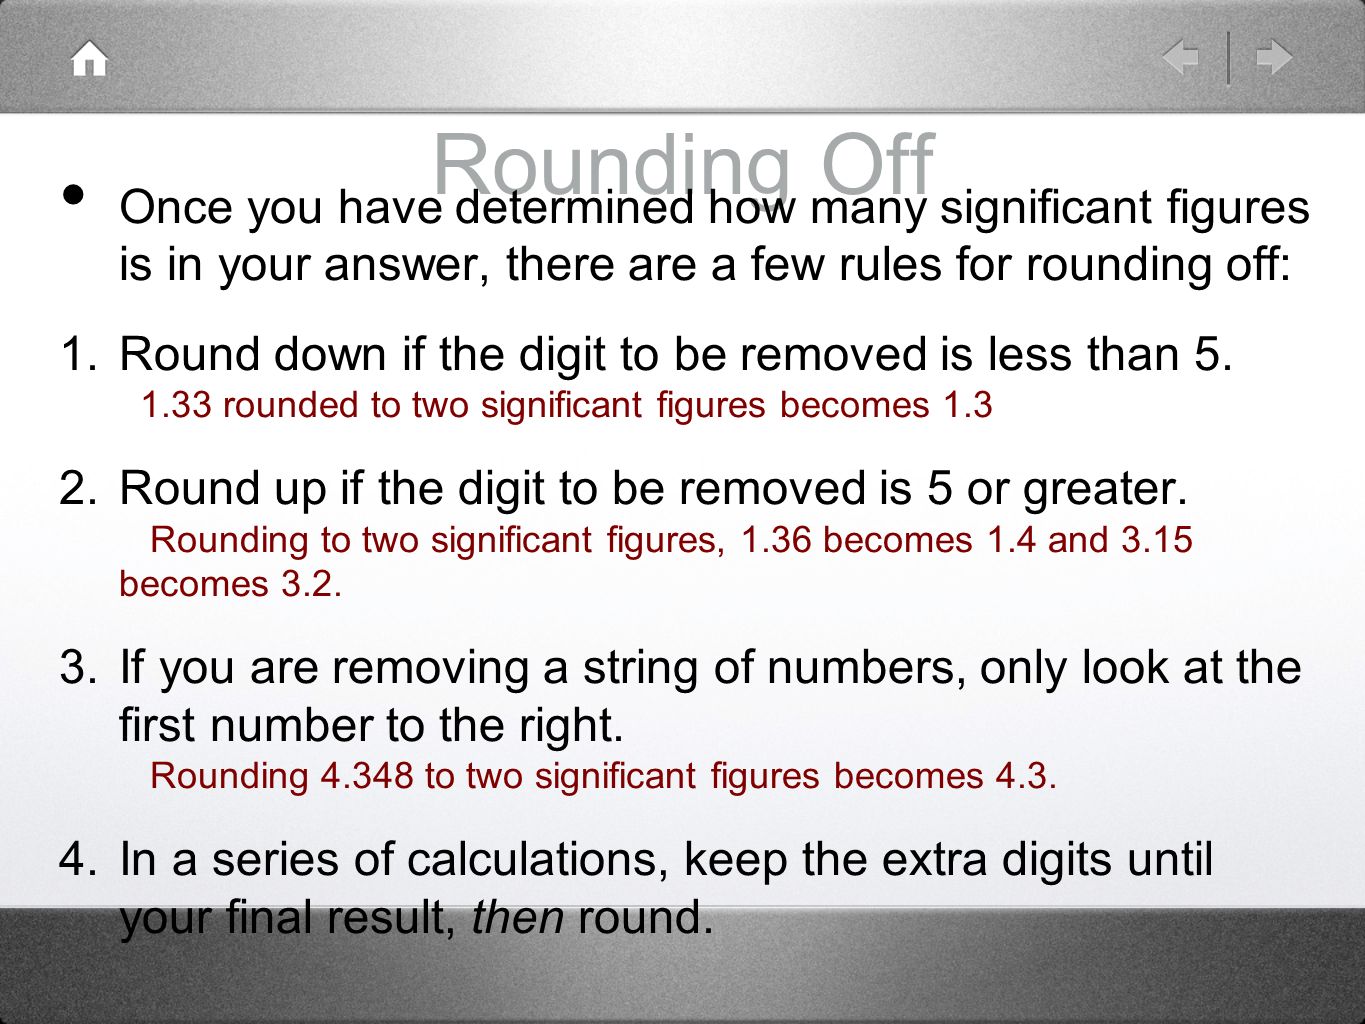 Rounding Off Once you have determined how many significant figures is in your answer, there are a few rules for rounding off: